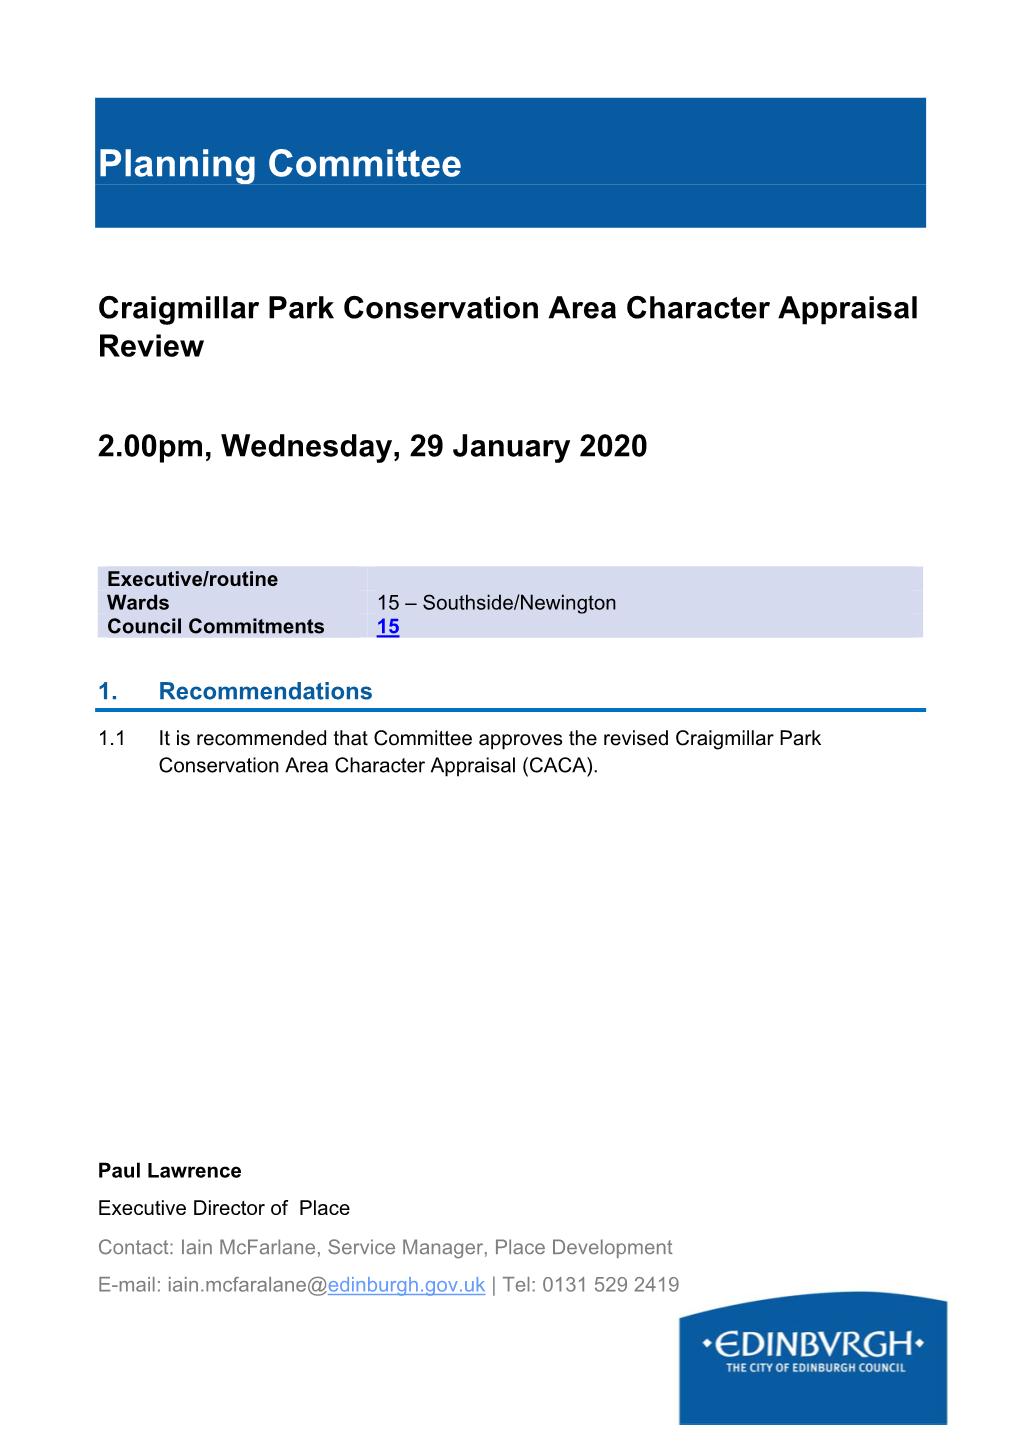 Craigmillar Park Conservation Area Character Appraisal Review PDF 2